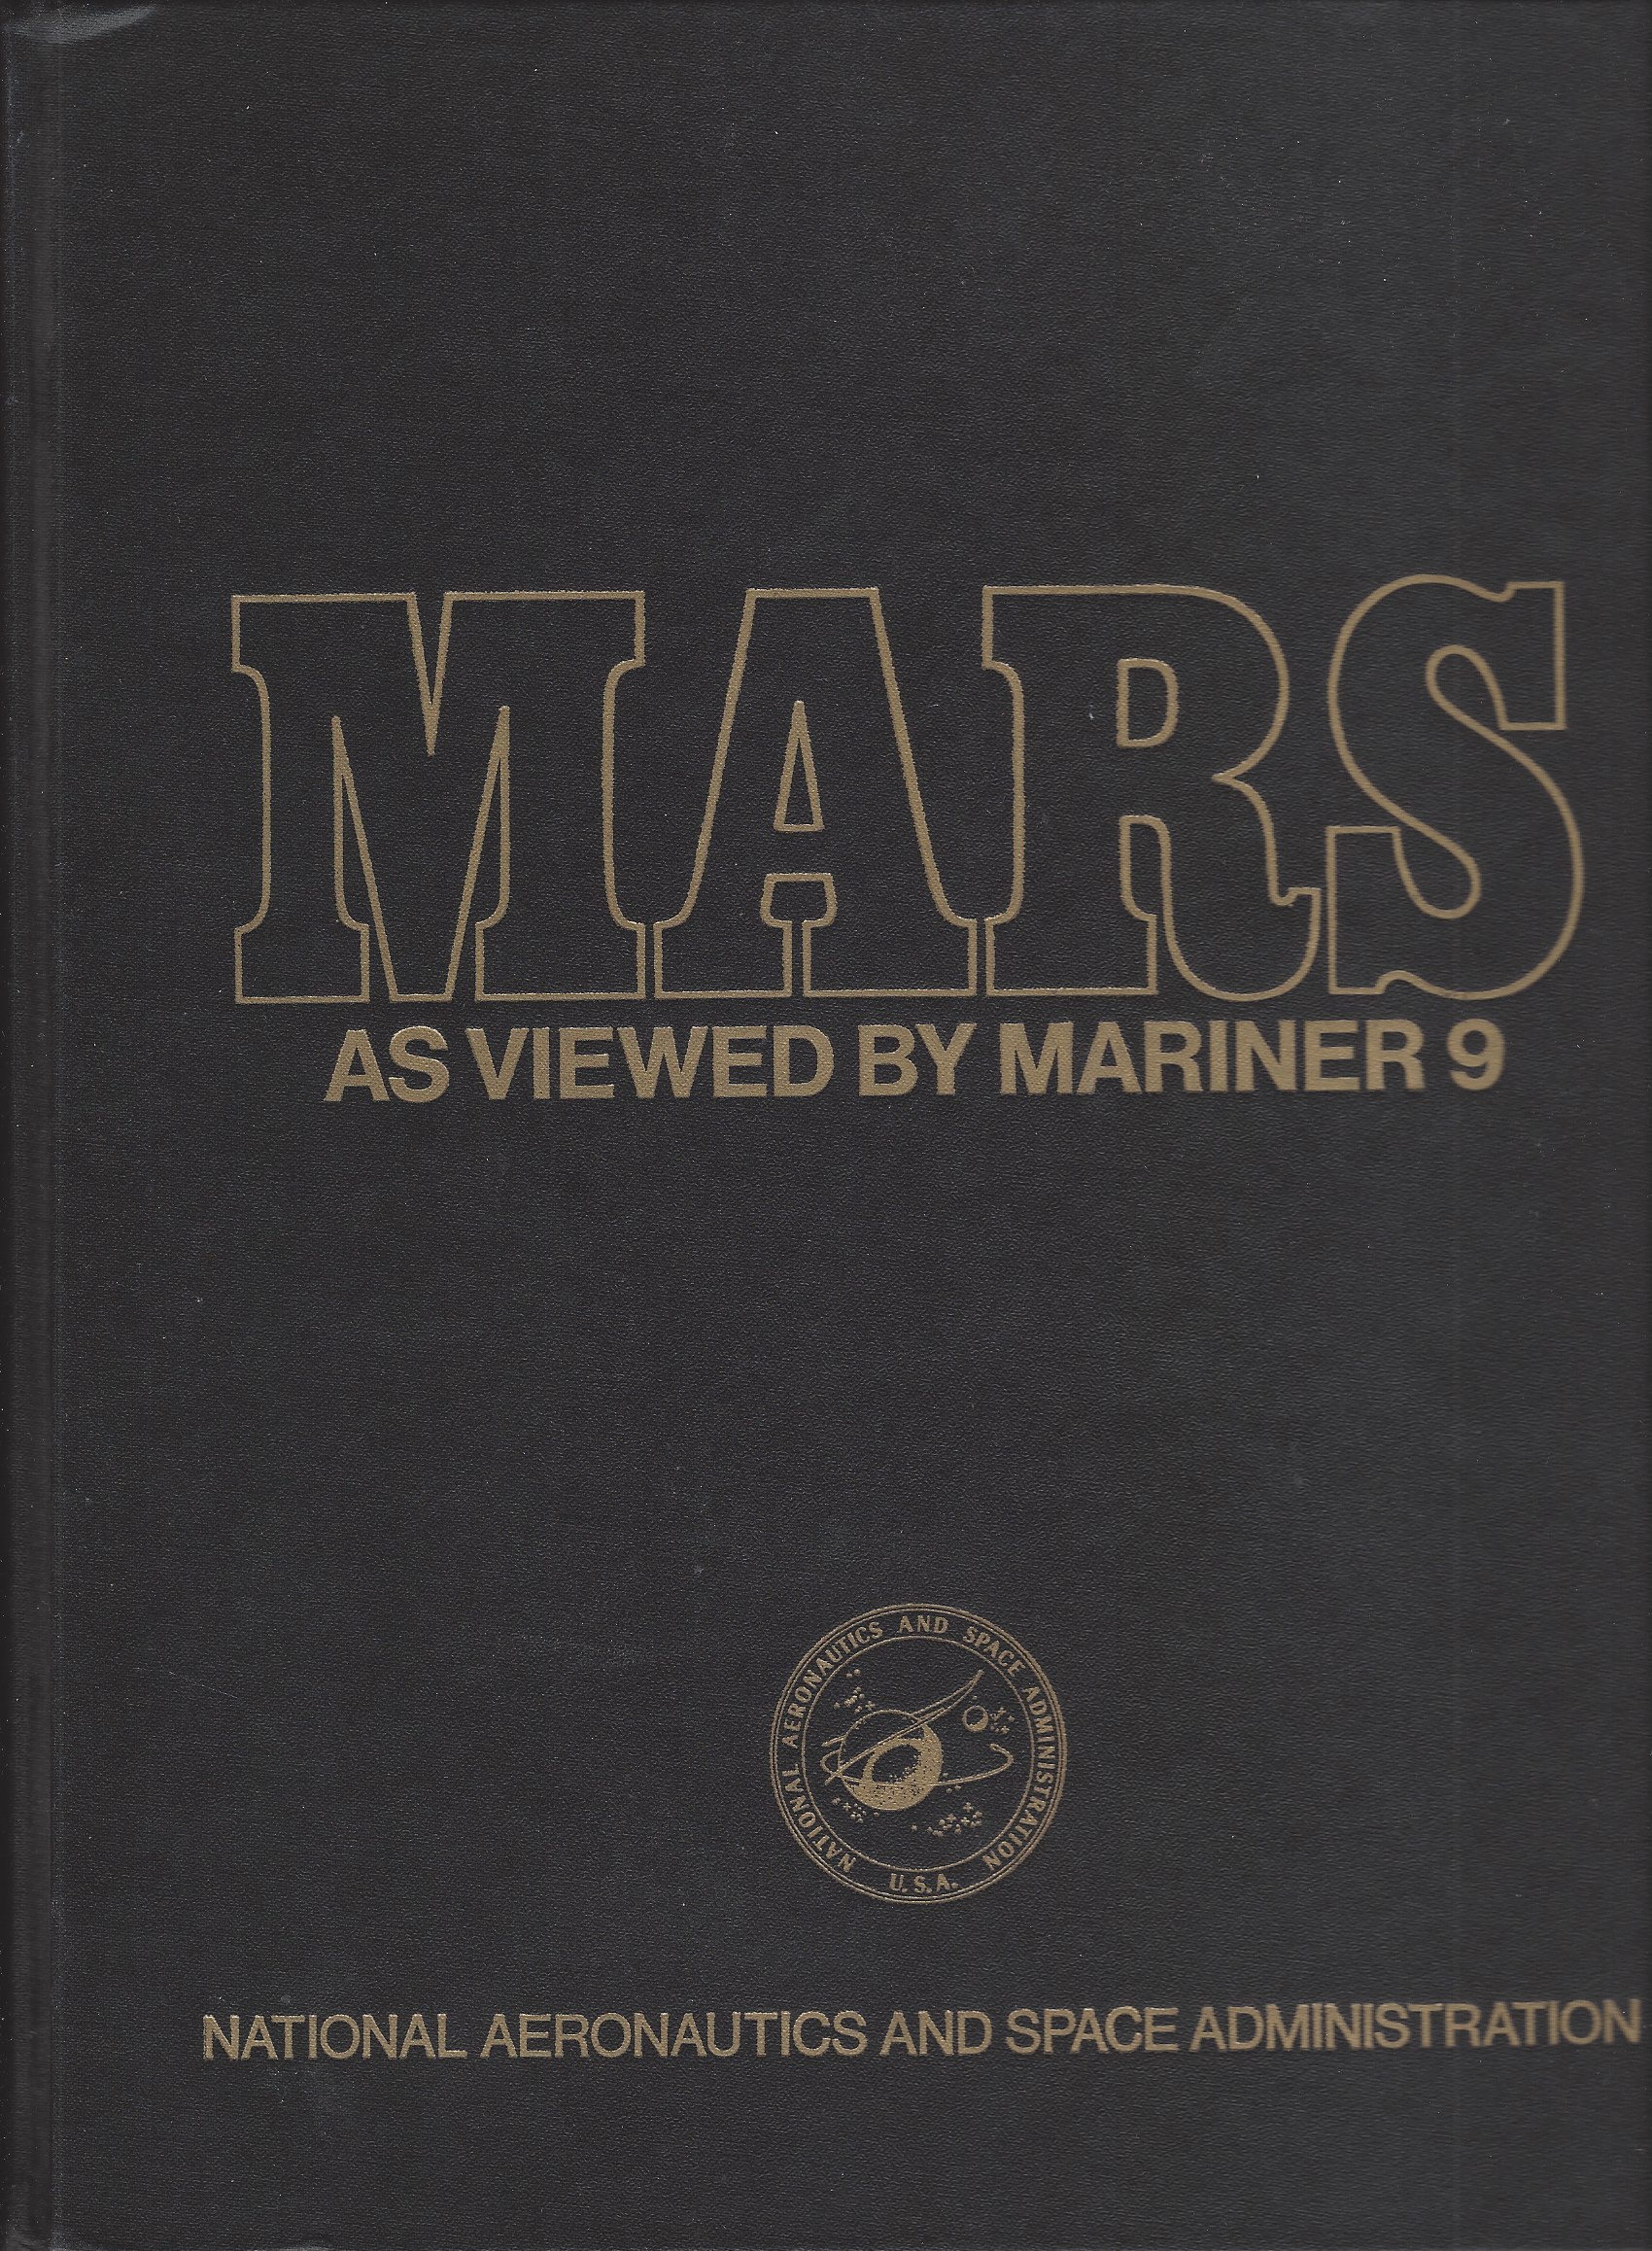 MARINER 9 TELEVISION TEAM - Mars As Viewed by Mariner 9: A Pictorial Presentation by the Mariner 9 Television Team and the Planetology Program Principal Investigators